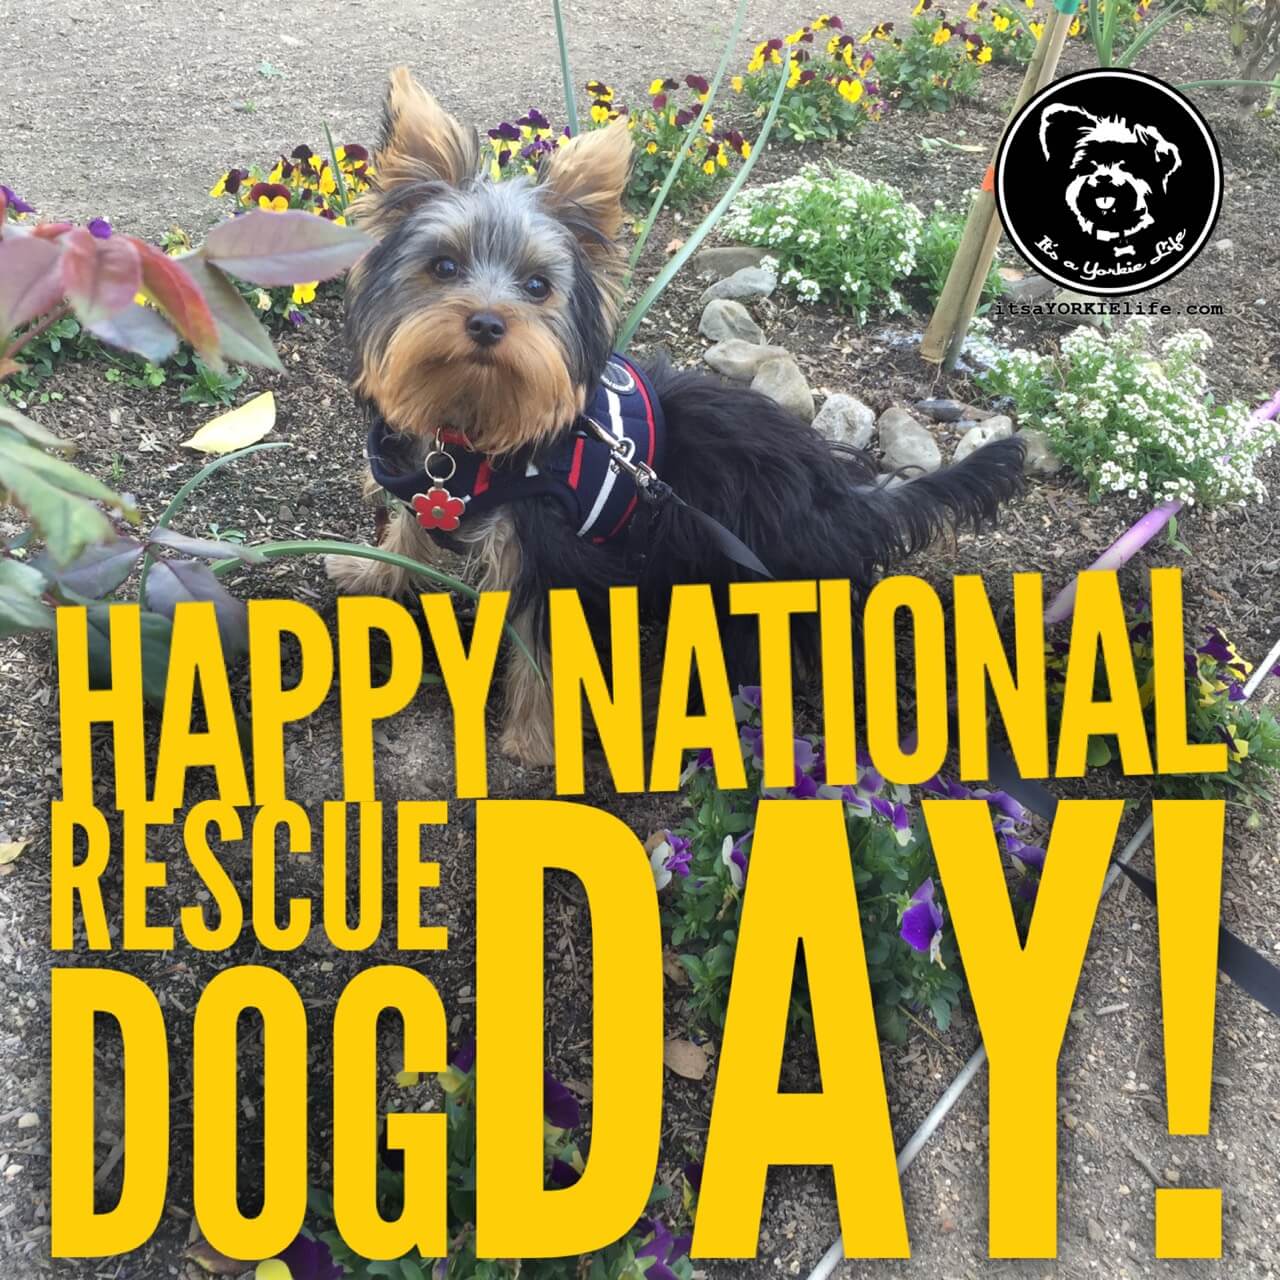 Happy National Rescue Dog Day! ⋆ It's a Yorkie Life